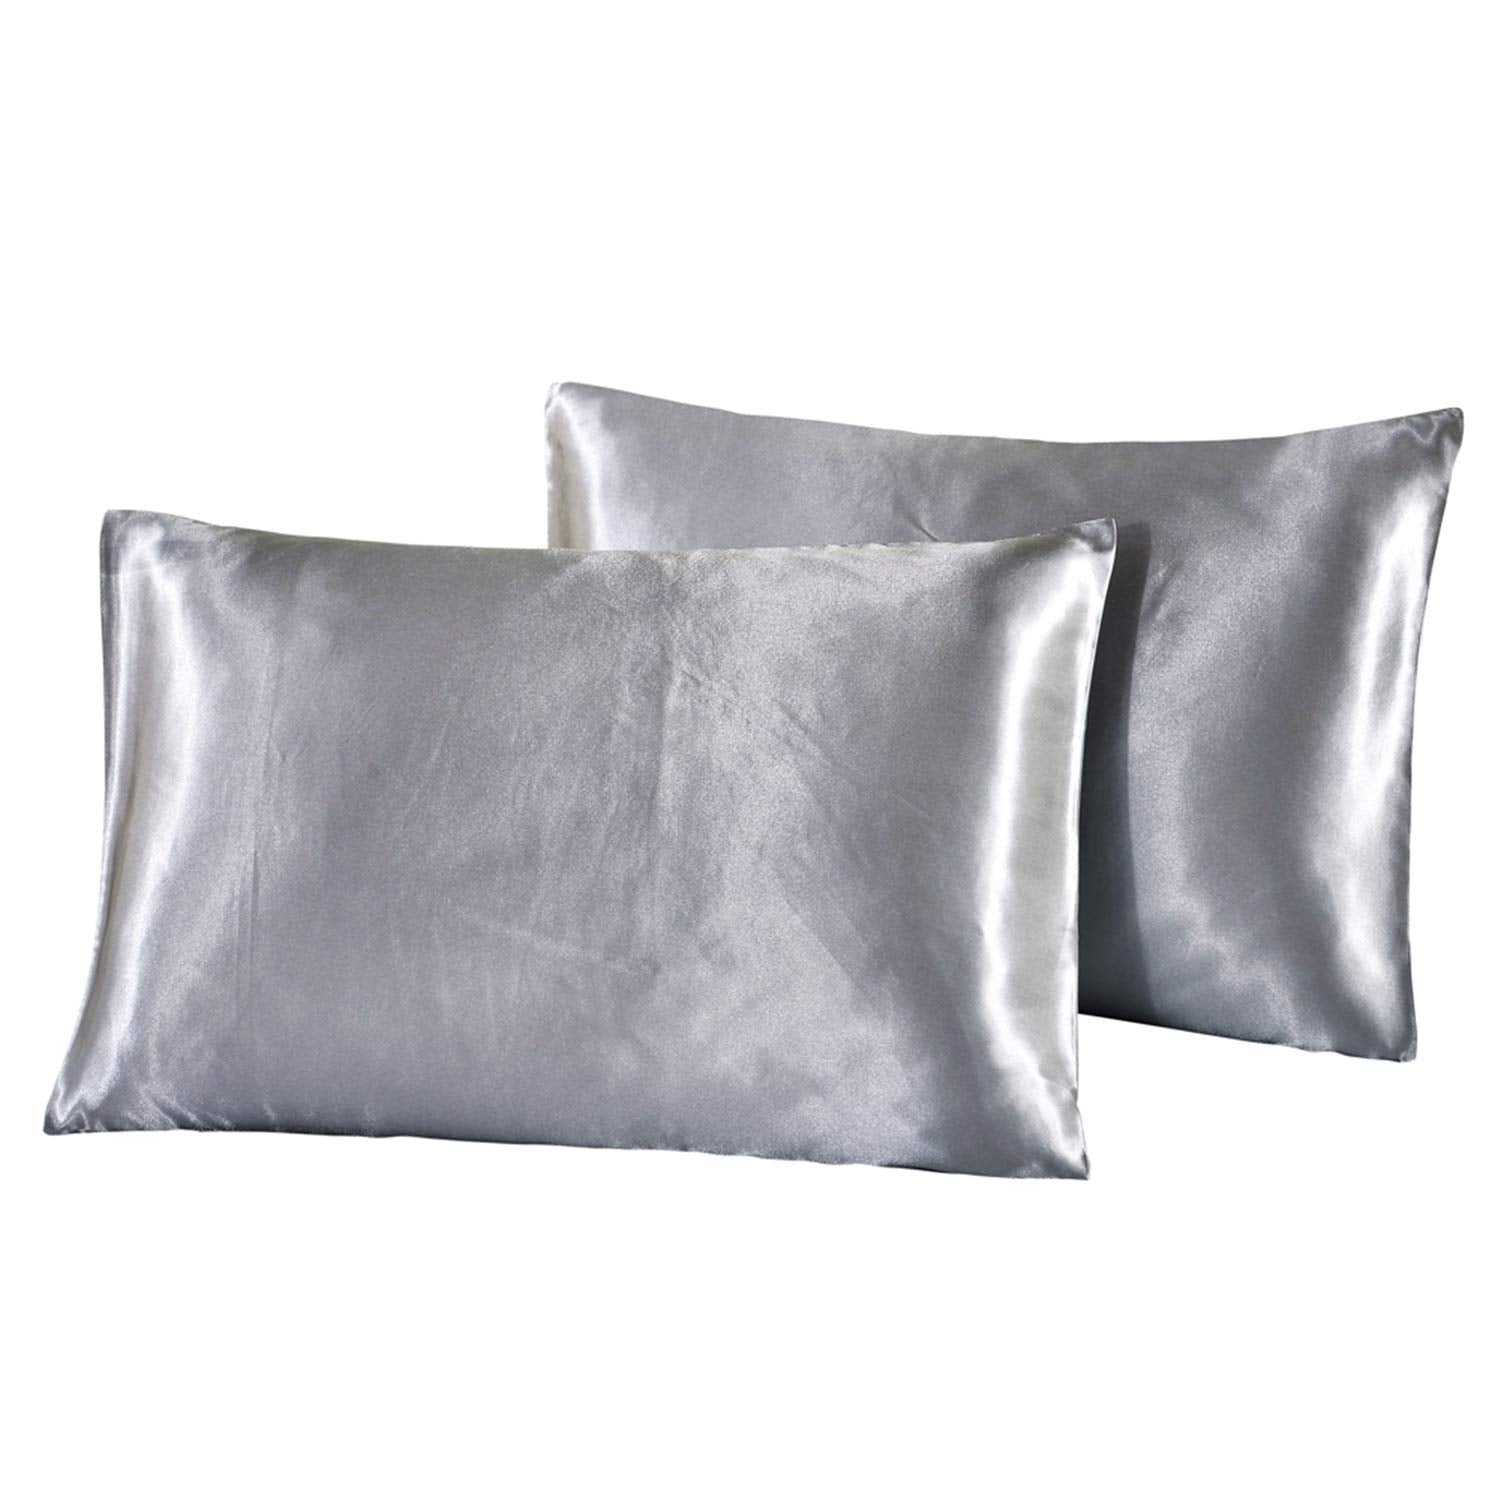 Silver Grey Satin Pillow Cases 2 Pack 50 x 75cm Standard Size - Silver Grey Pillowcases 2 Pack, Ultra-Soft Smooth Polyester Microfiber Pillow Case for Hair and Skin, Envelope Closure